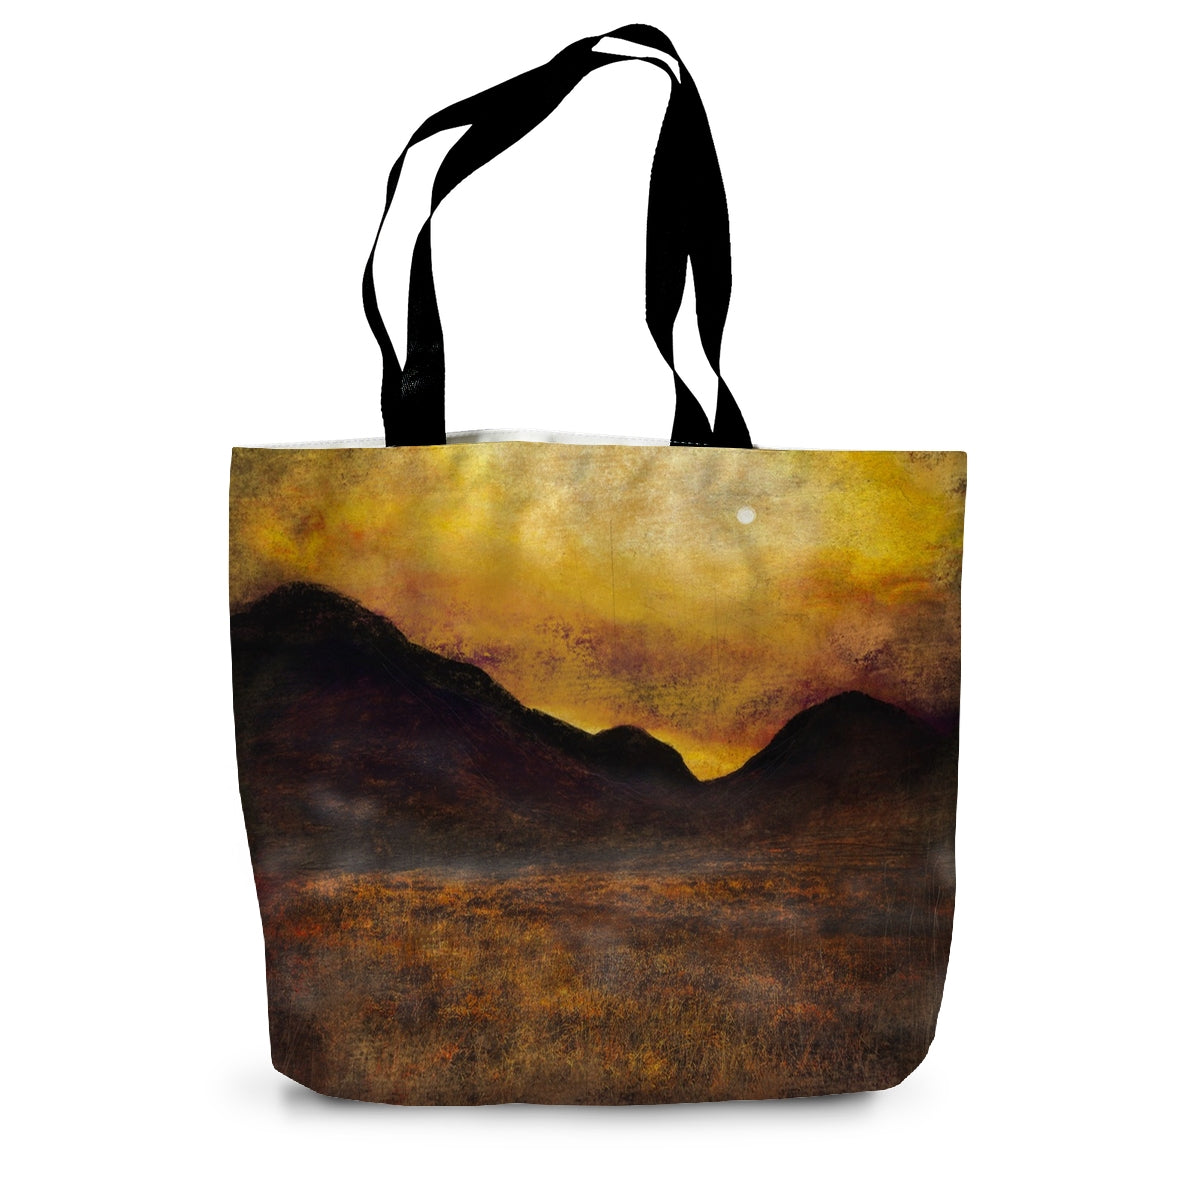 Glencoe Moonlight Art Gifts Canvas Tote Bag-Bags-Glencoe Art Gallery-14"x18.5"-Paintings, Prints, Homeware, Art Gifts From Scotland By Scottish Artist Kevin Hunter